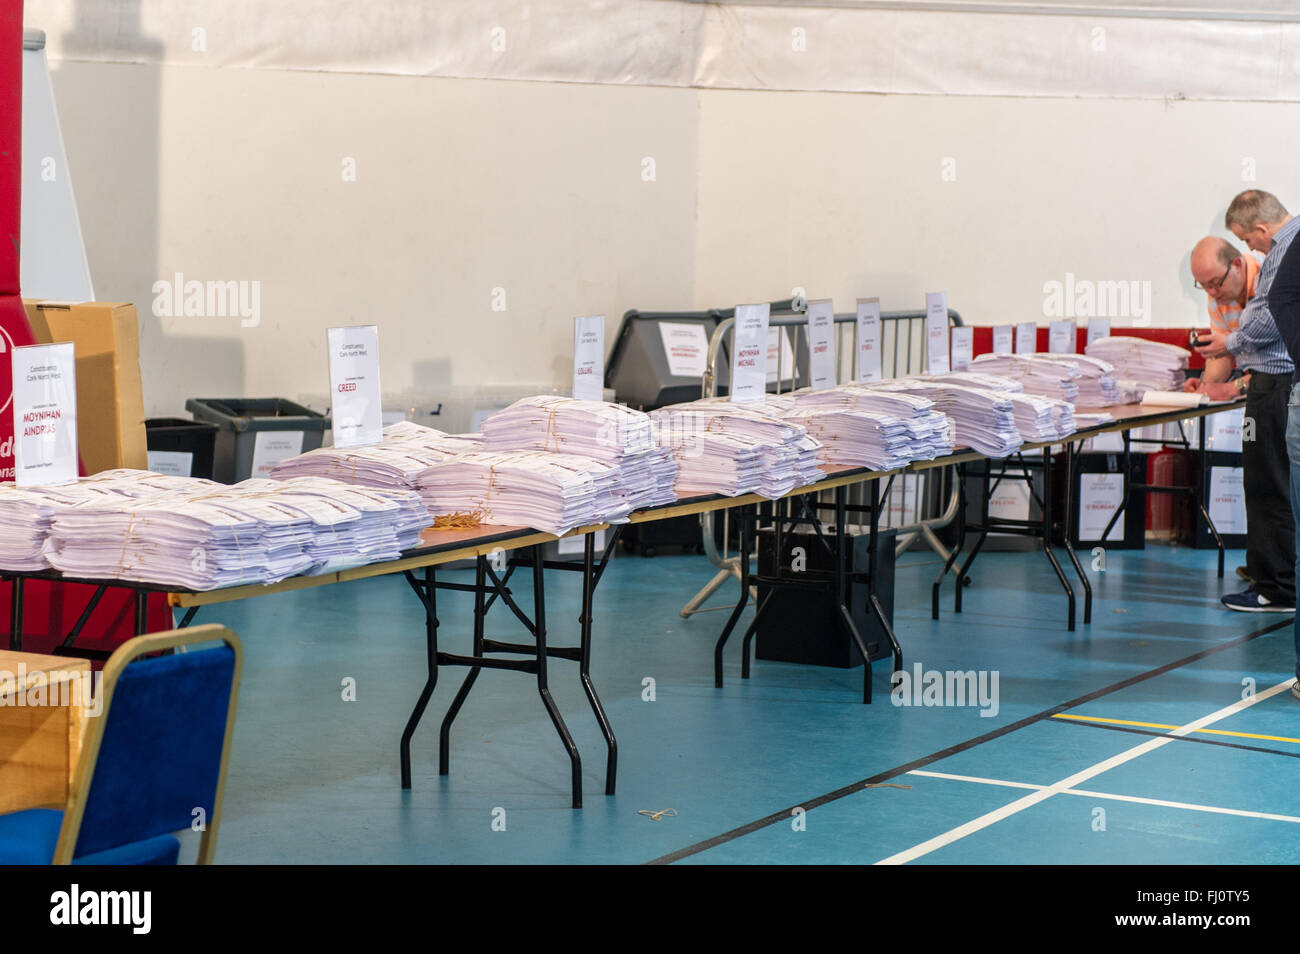 Ballincollig, Ireland. 27th February, 2016. Thousands of voting slips sit on tables waiting for the second count in the Cork North West constituency in the 2016 Irish General Election. The count was held at Coláiste Choilm in Ballincollig, Co. Cork, Ireland. Credit: AG News/Alamy Live News Stock Photo